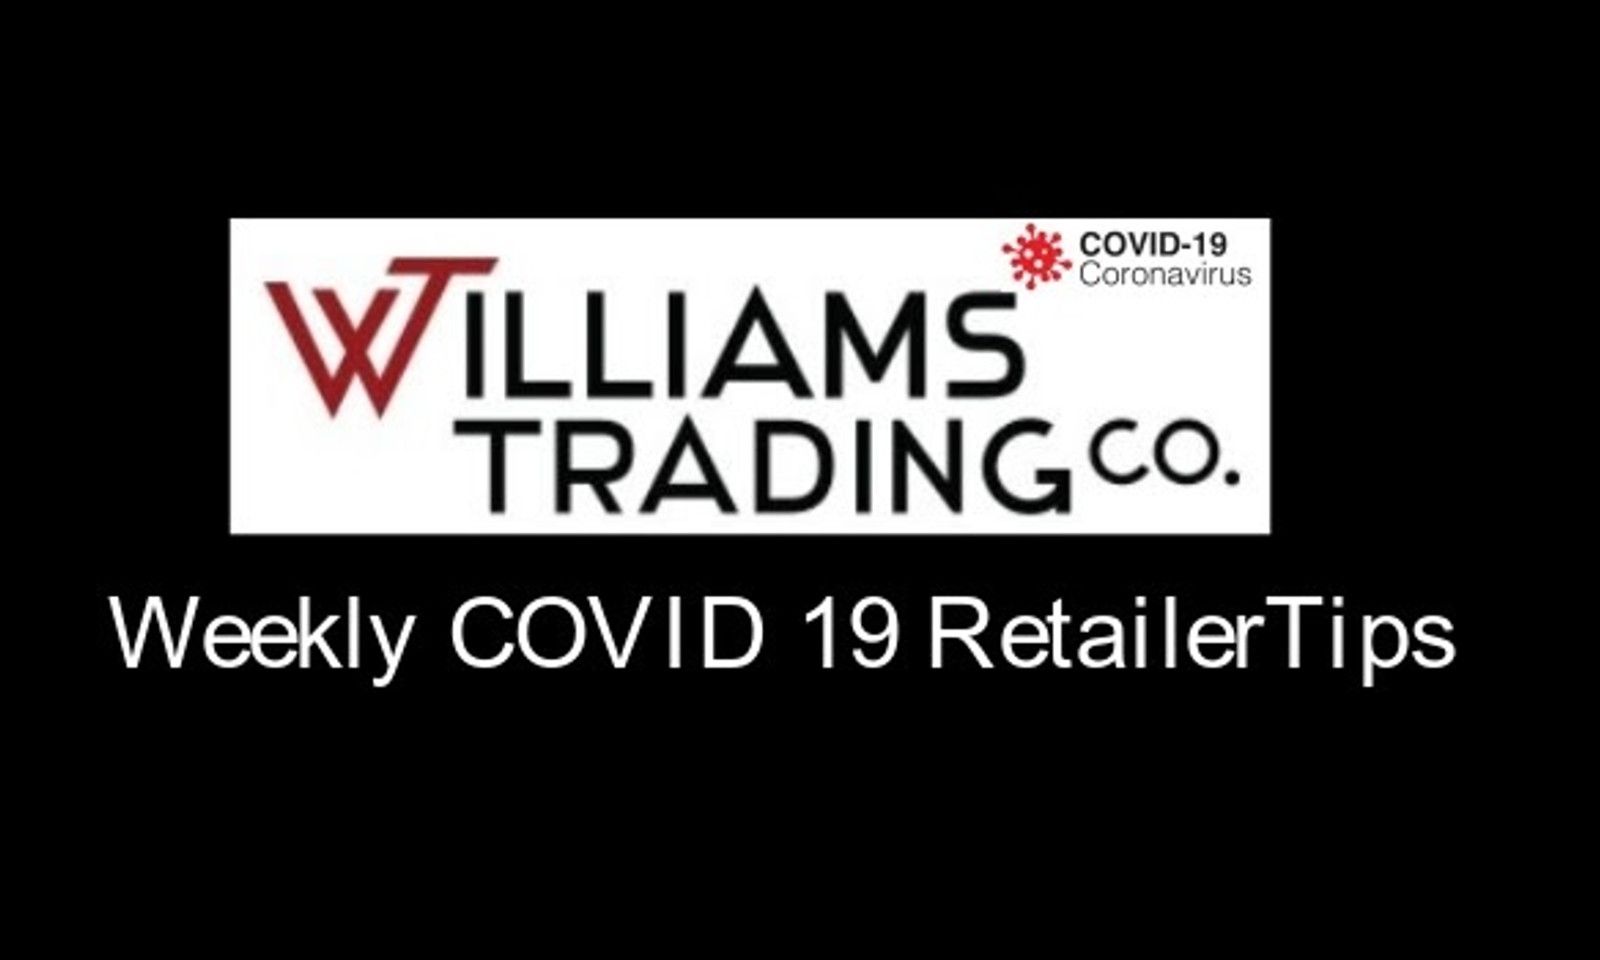 Williams Trading Co. Offers Tips on Better Mental Health